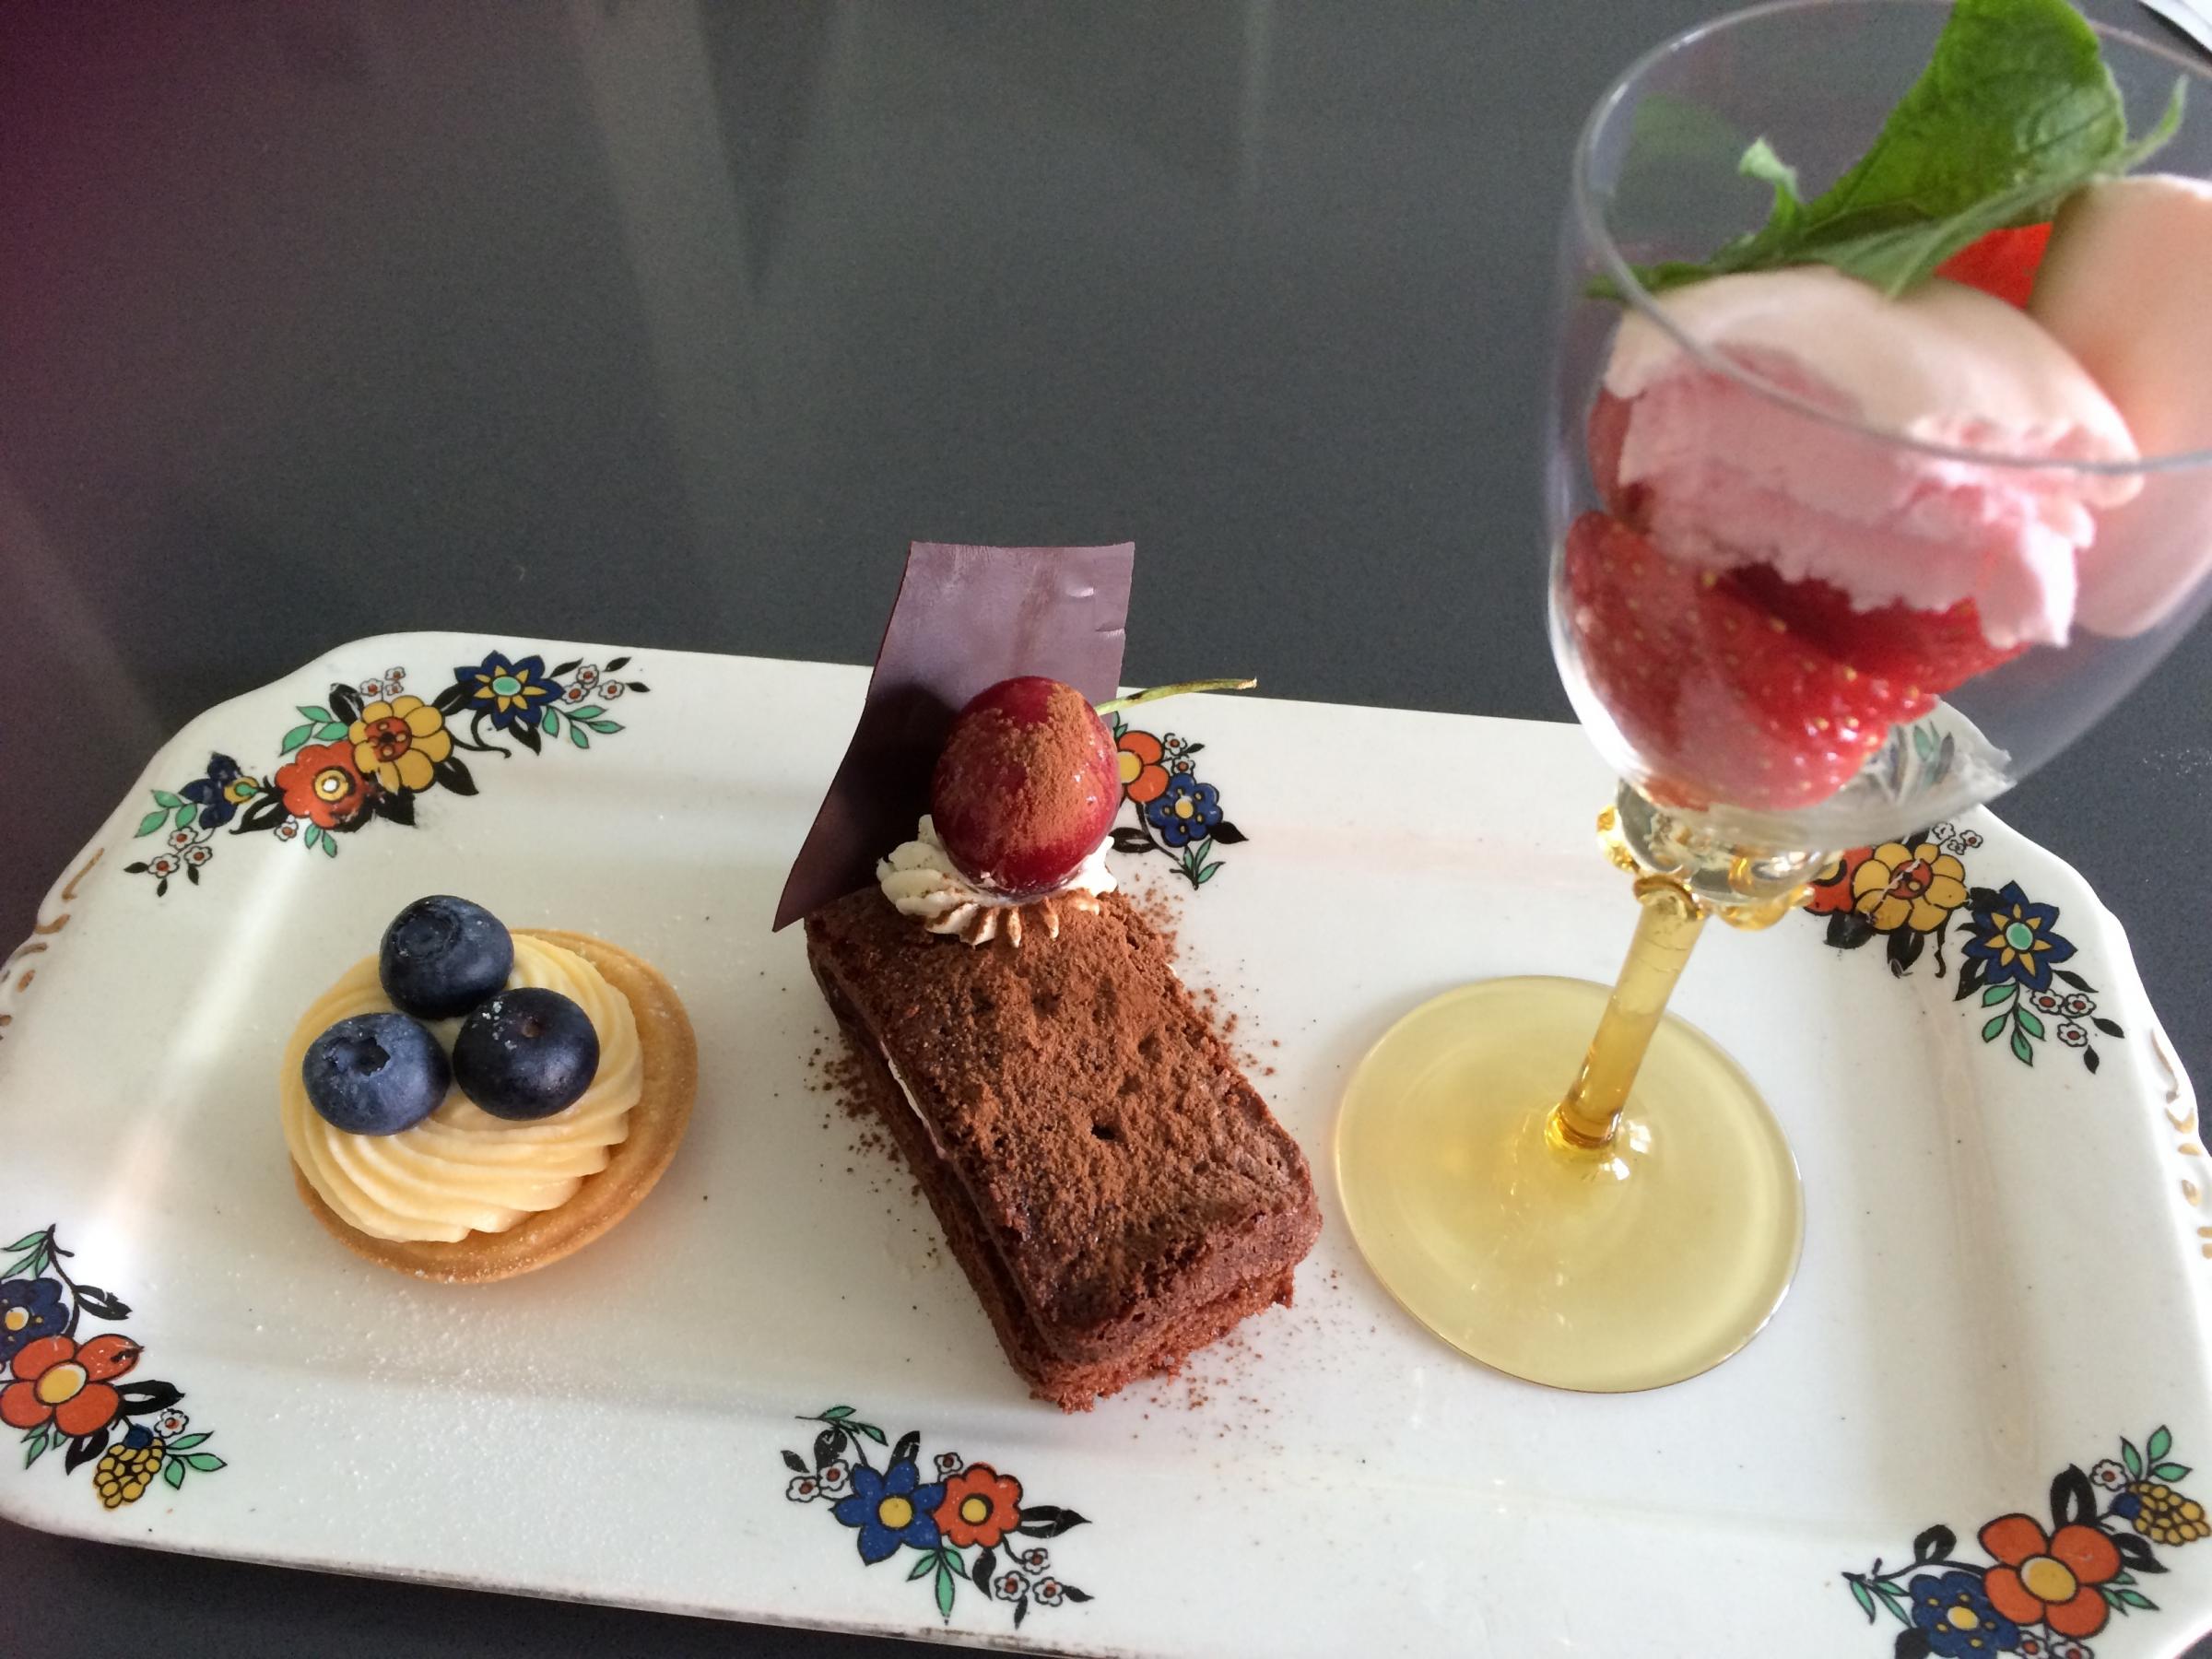 Room Forty afternoon tea treats taste as good as they look